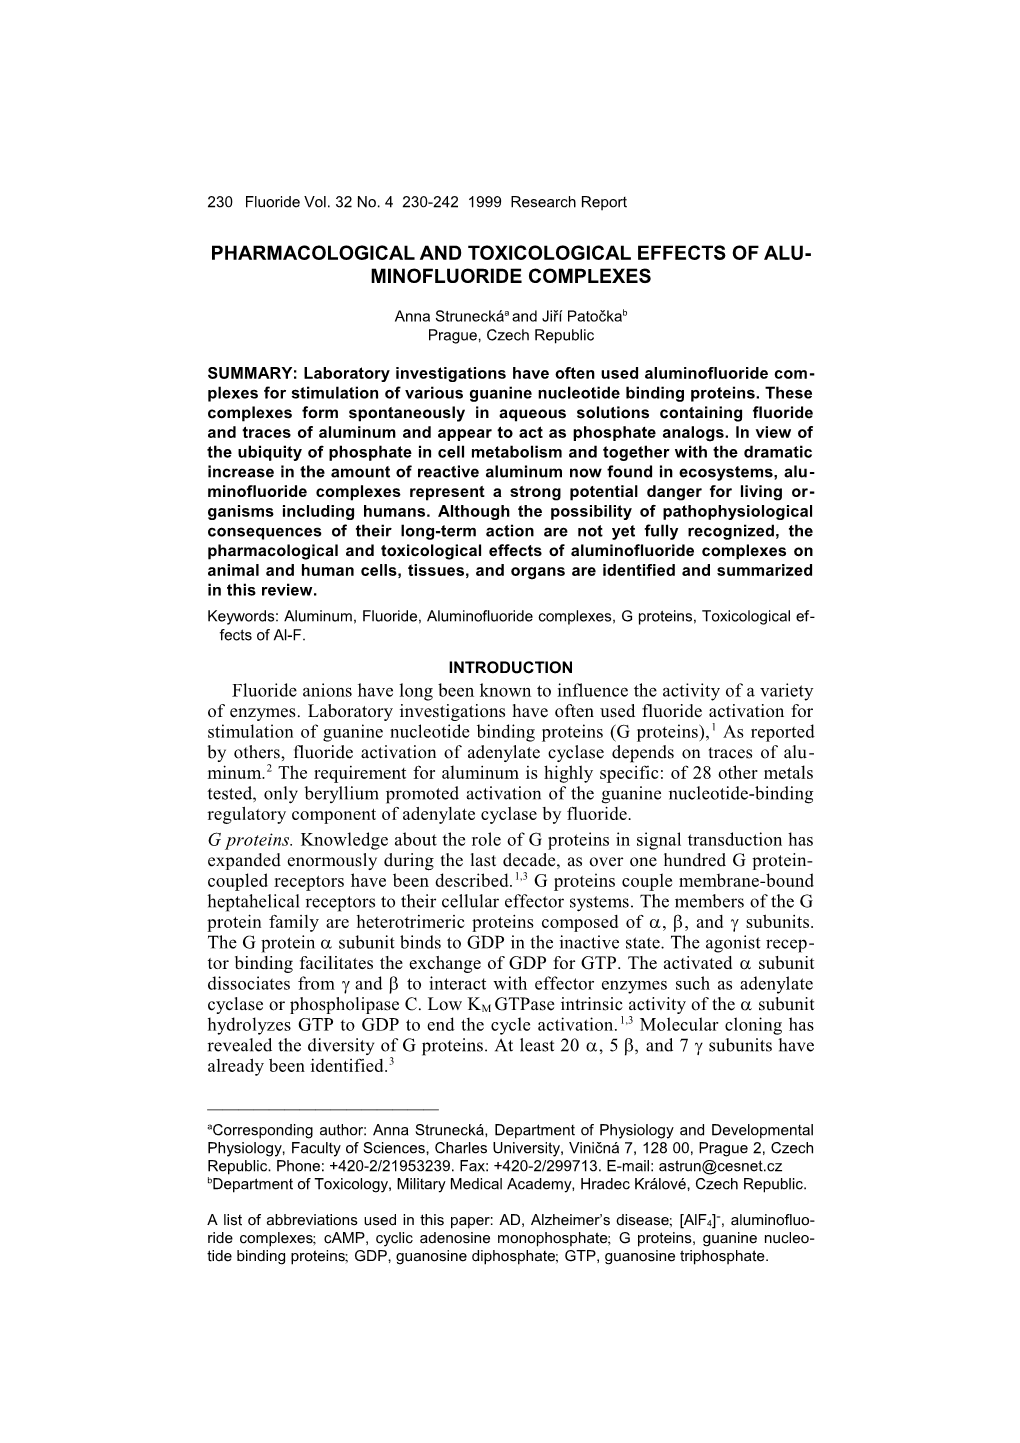 Pharmacological and Toxicological Effects of Aluminofluoride Complexes